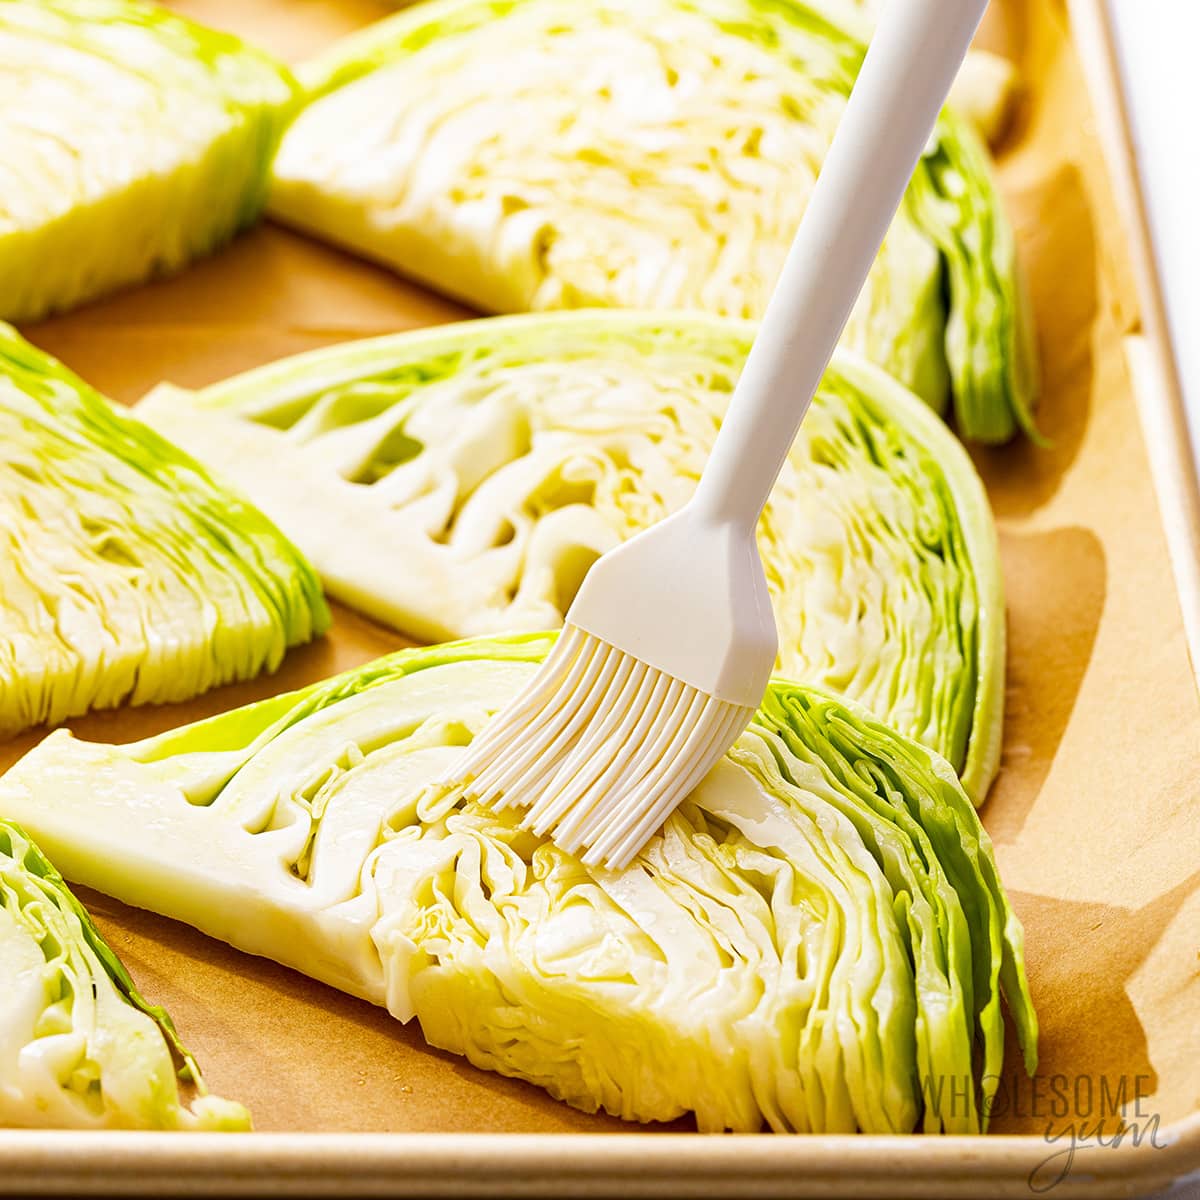 Cabbage wedges brushed with olive oil mixture.